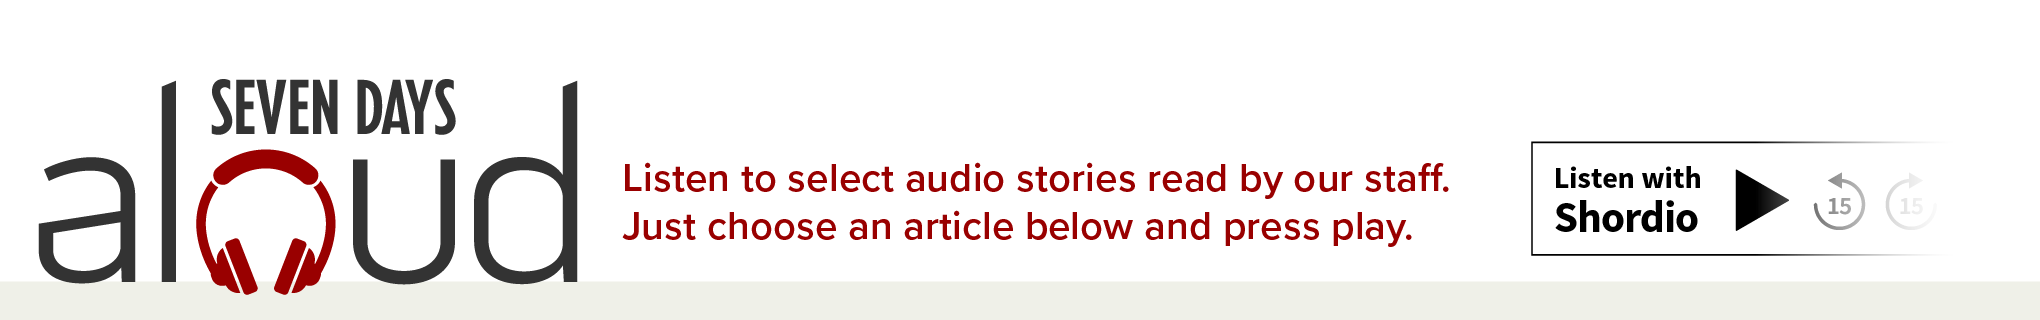 Seven Days Aloud: Listen to select audio stories read by our staff. Just choose an article below and press play.